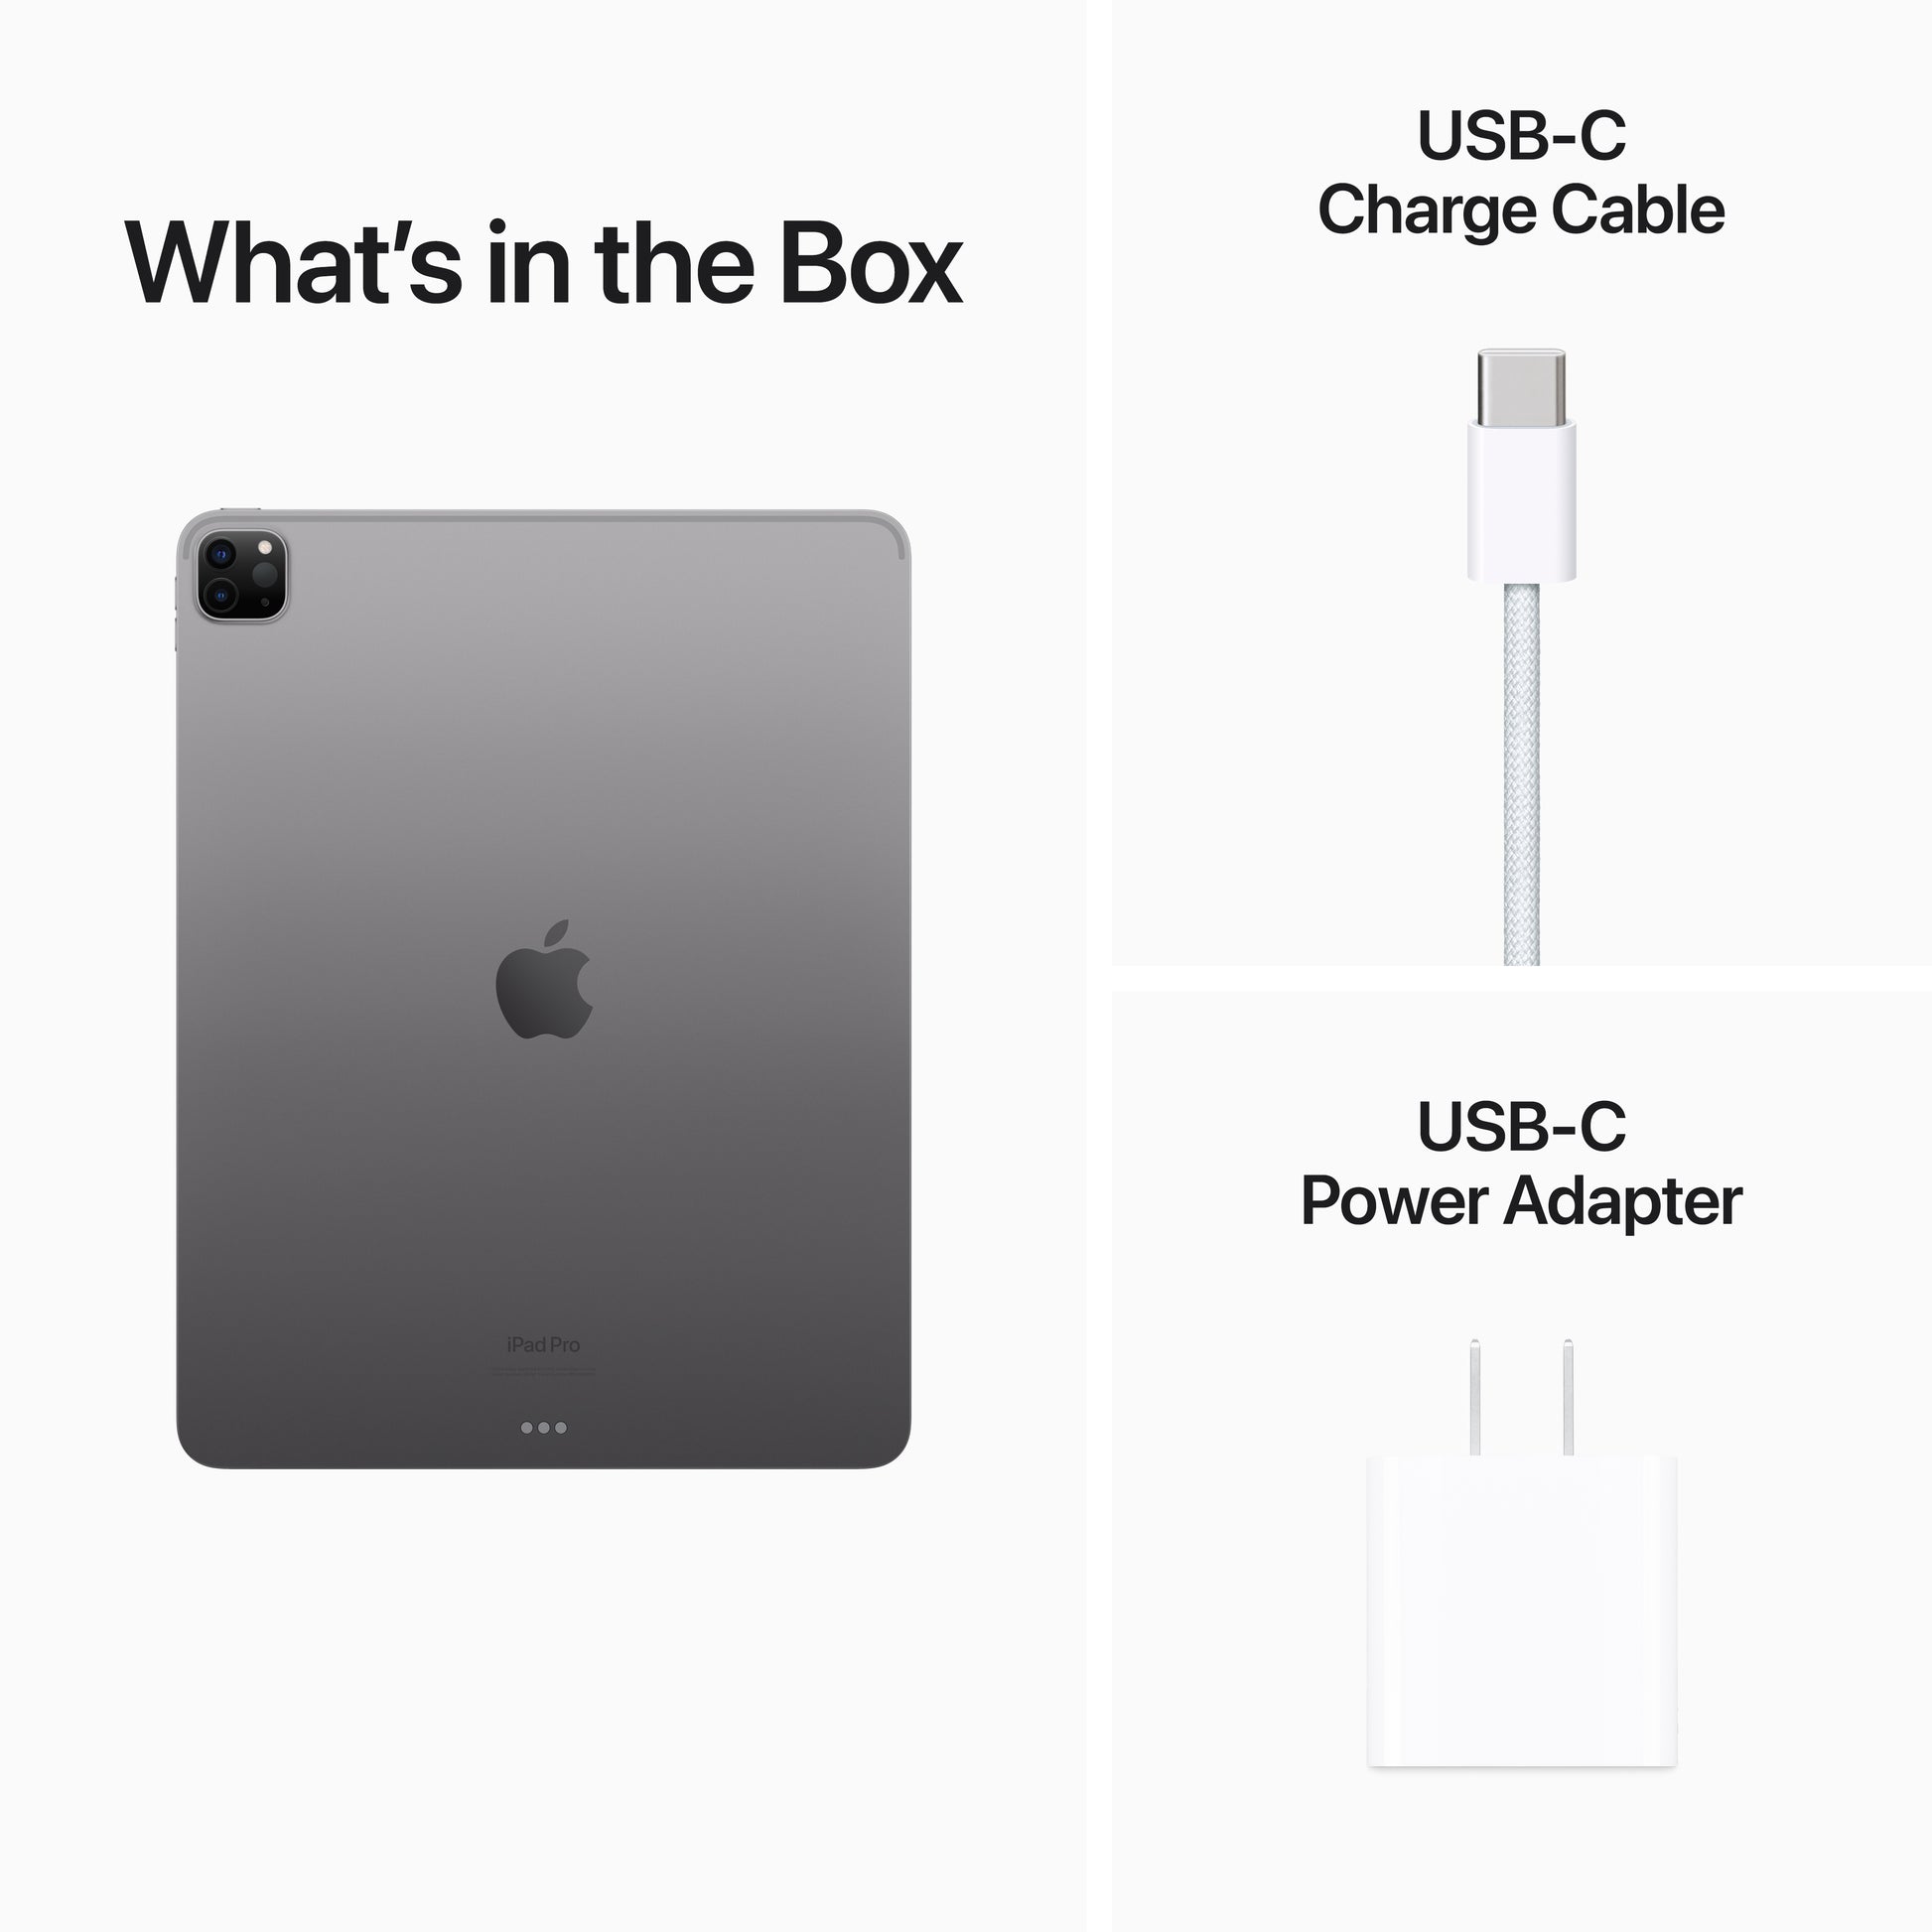 New iPad 10 and M2 iPad Pro Come With Woven USB-C Cable That Can Be  Purchased Separately - iClarified